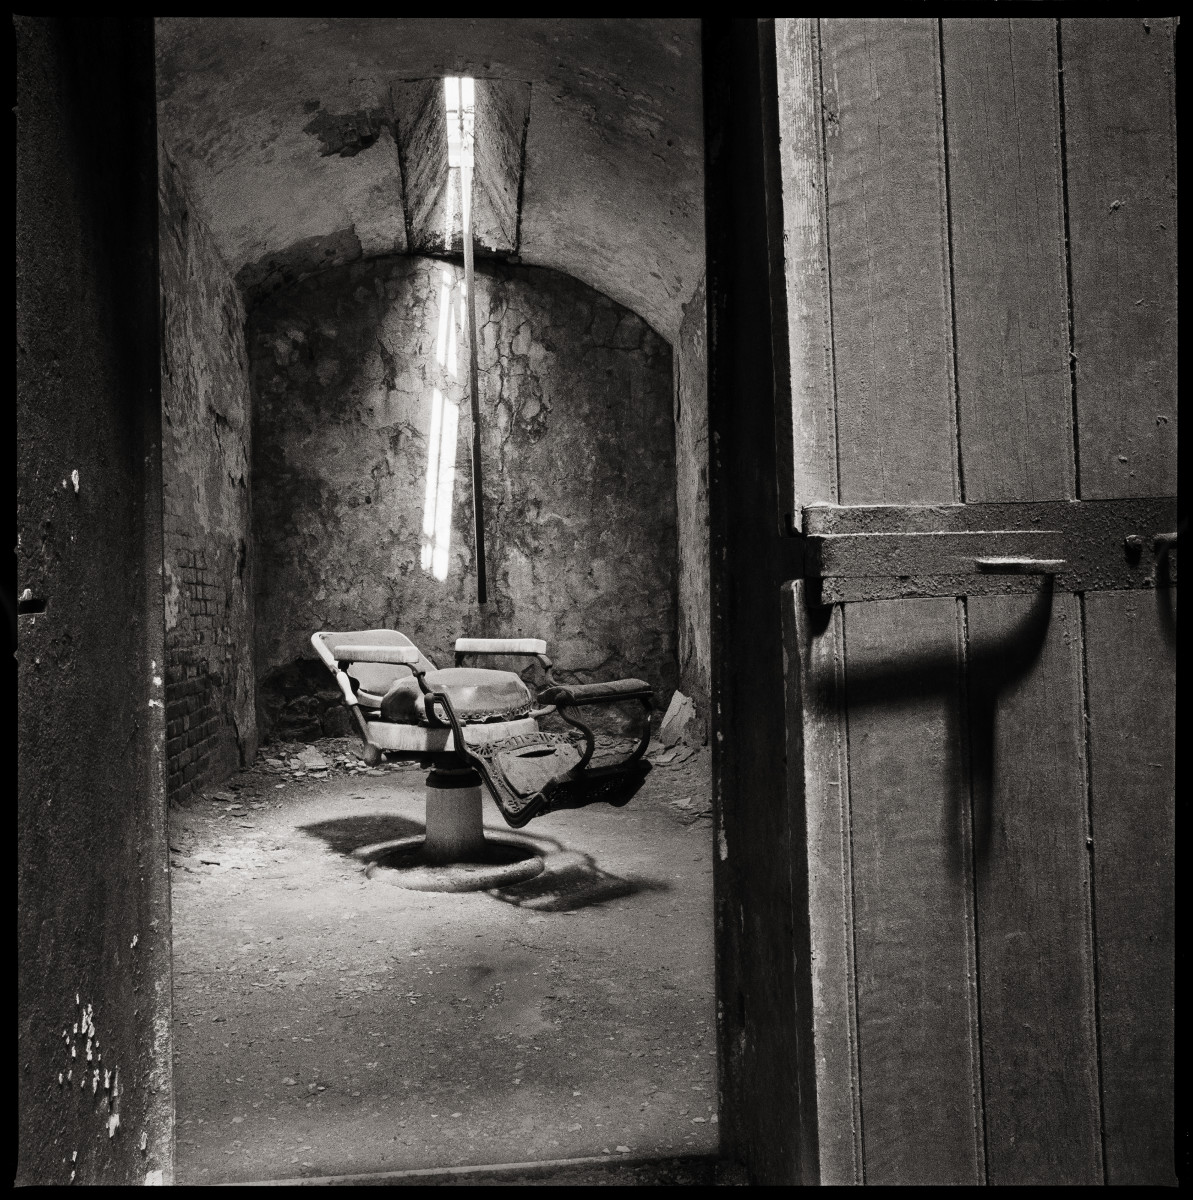 Dentist Chair by Eric T. Kunsman  Image: ID: A black and white image shows a room with an open door.  Inside the room there is an old dentist chair with a beam of light on the back wall.